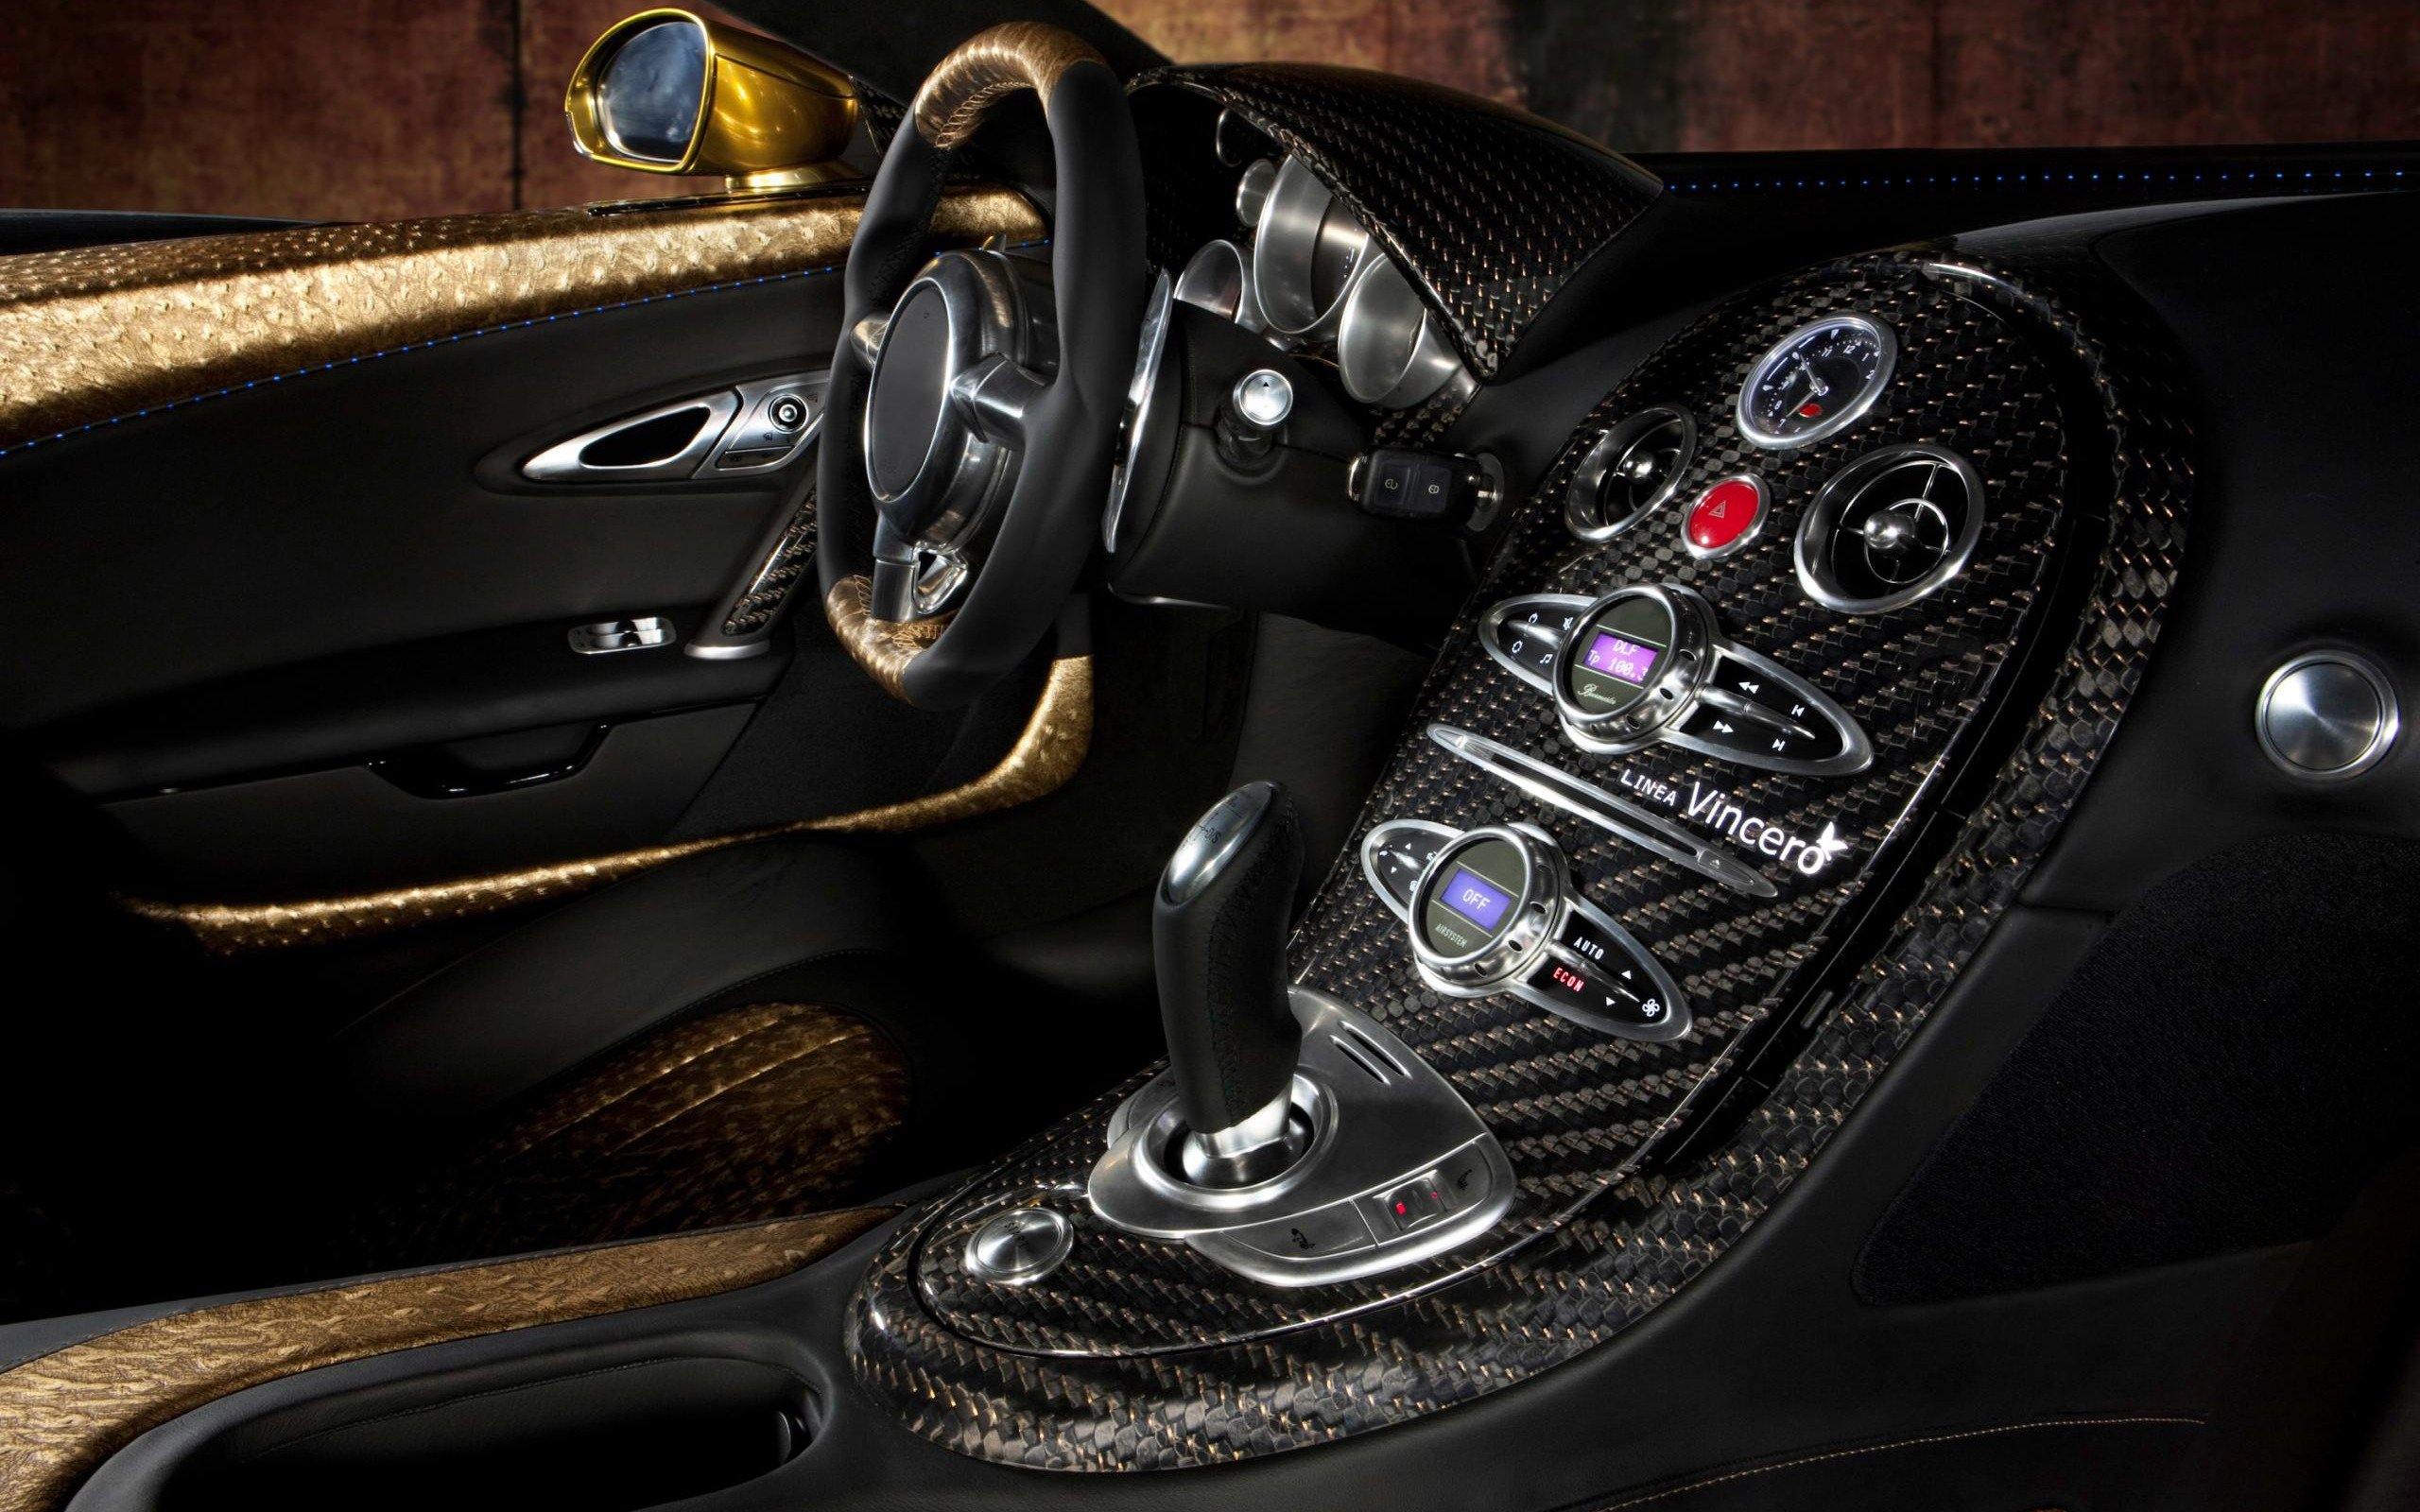 Download wallpapers Bugatti Veyron, Mansory, interior, inside view